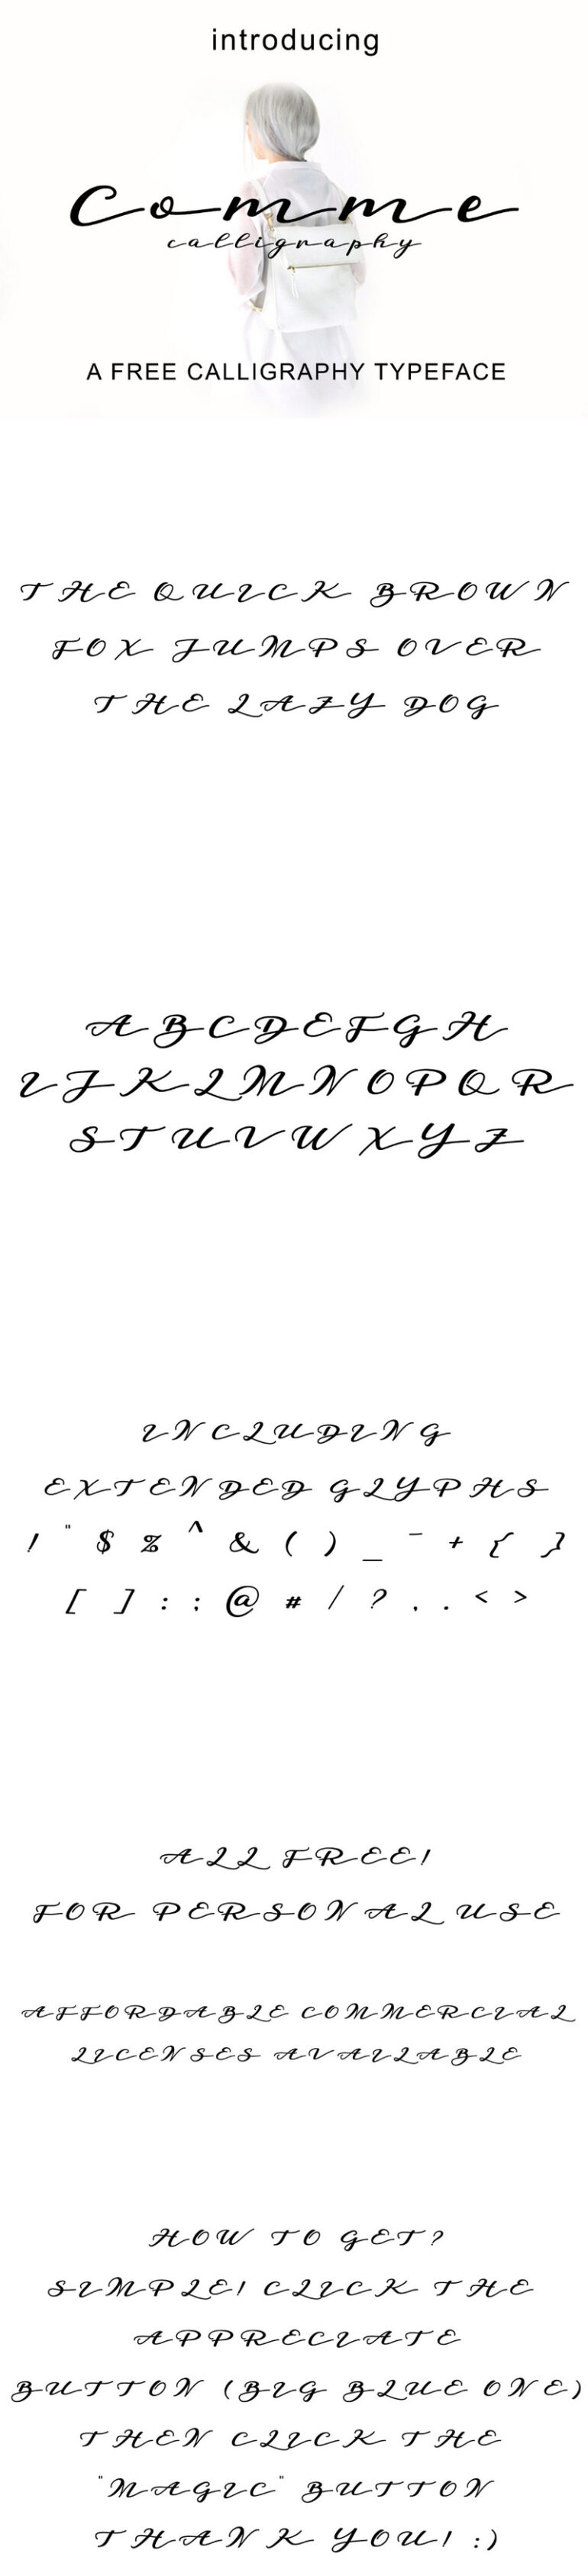 comme-free-font